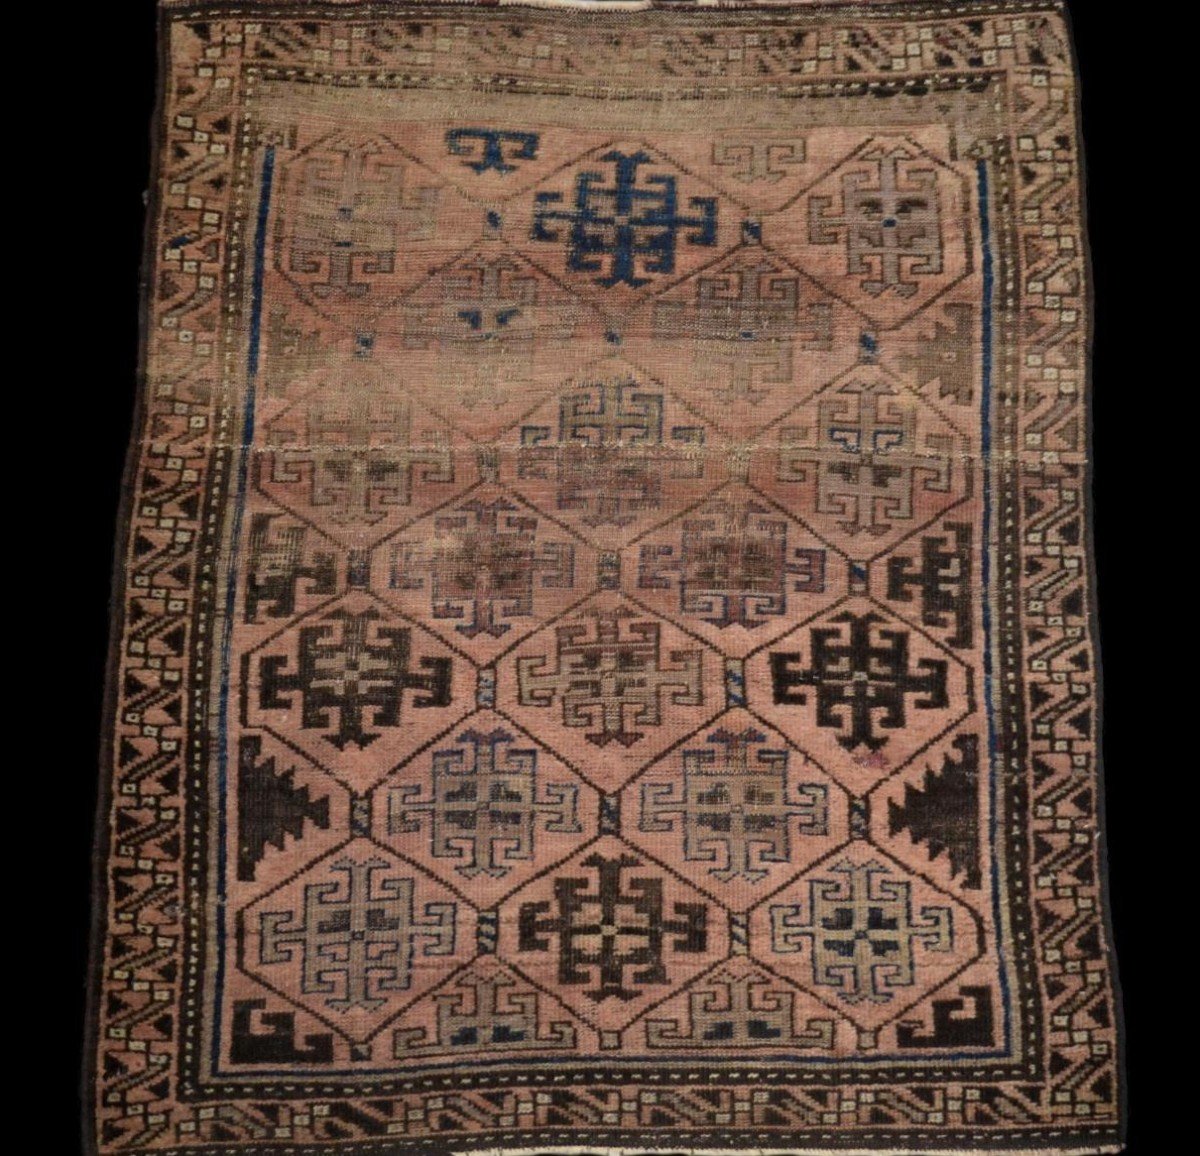 Old Central Asia Rug, 100 Cm X 124 Cm, Hand-knotted Wool, Circa 1900, Beautiful Patina